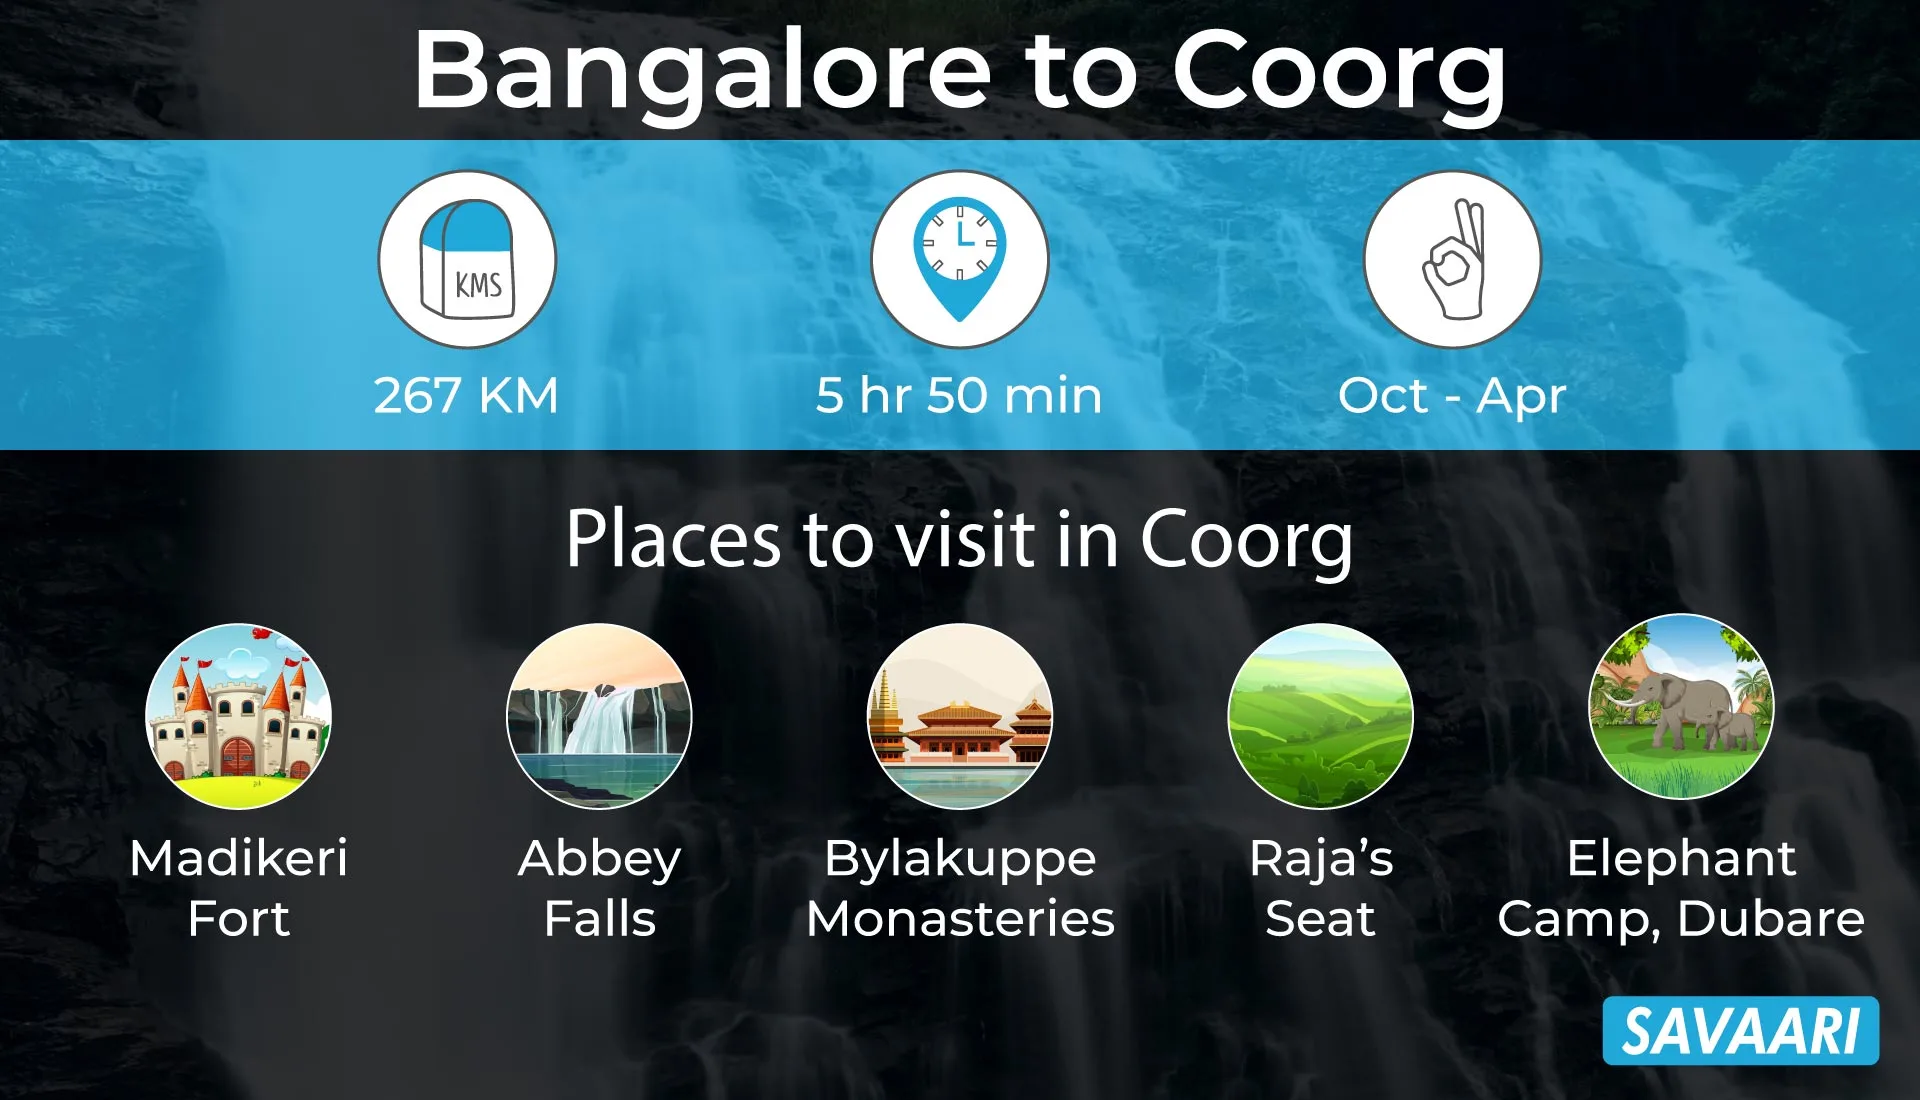 Bangalore to Coorg road trip